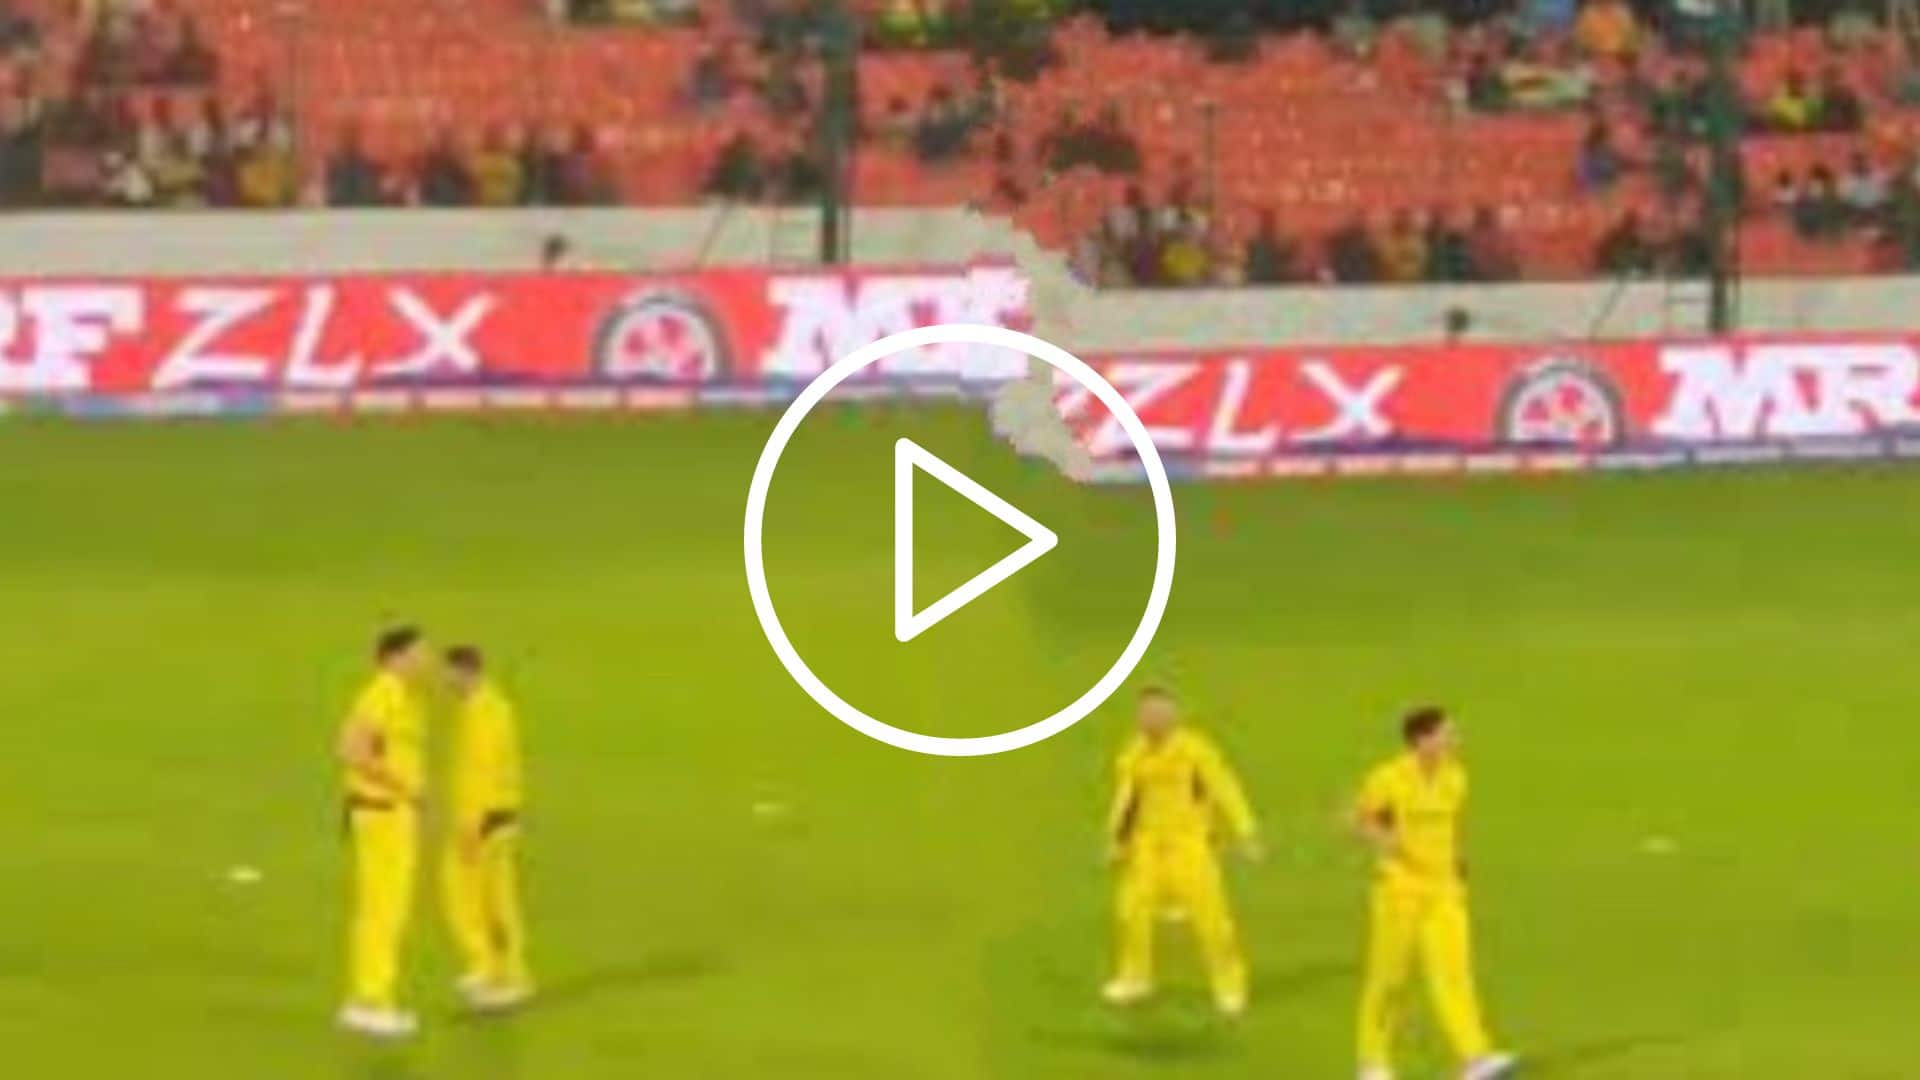 [Watch] David Warner Dances To Srivalli Song From 'Pushpa' Movie During Warm-Up Match Vs PAK